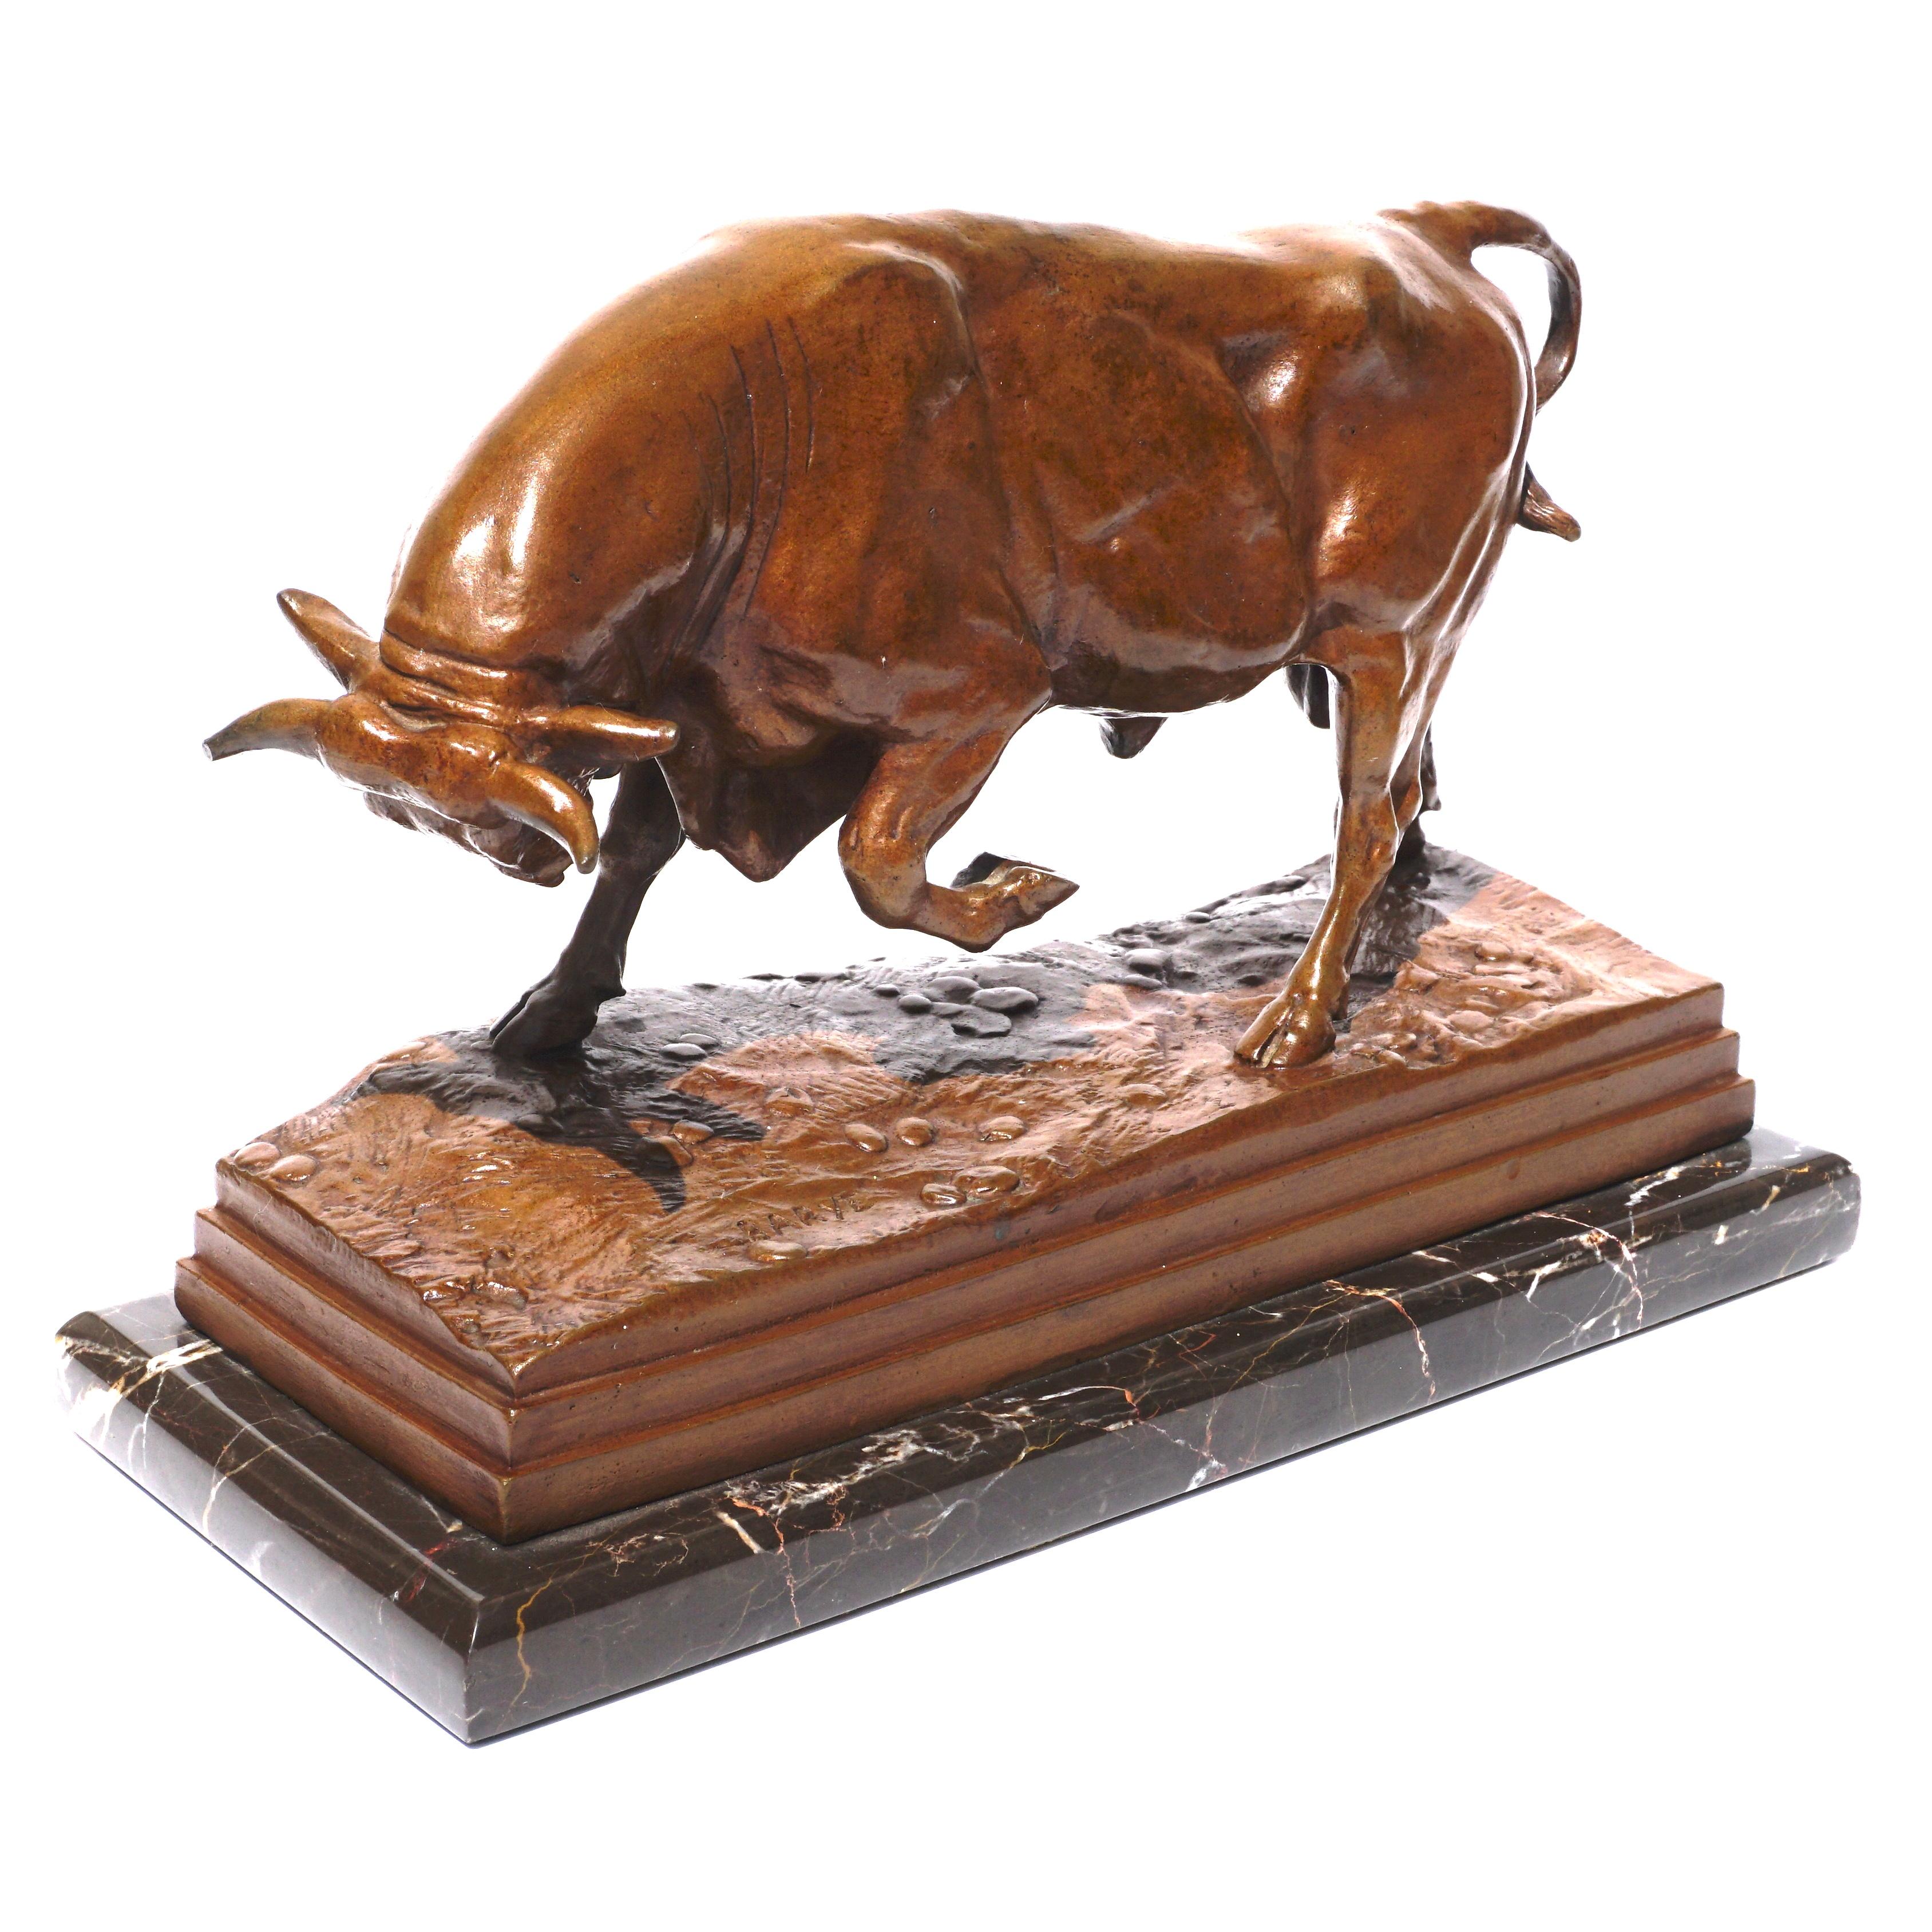 Antoine-Louis Barye (French, 1795-1875) 
Taureau debout, seconde version (Standing bull, second version)
Rich milk chocolate patina and excellent detail. 

Signed “Barye” and marked with “F. Barbedienne Fondeur” foundry.

Very good to excellent